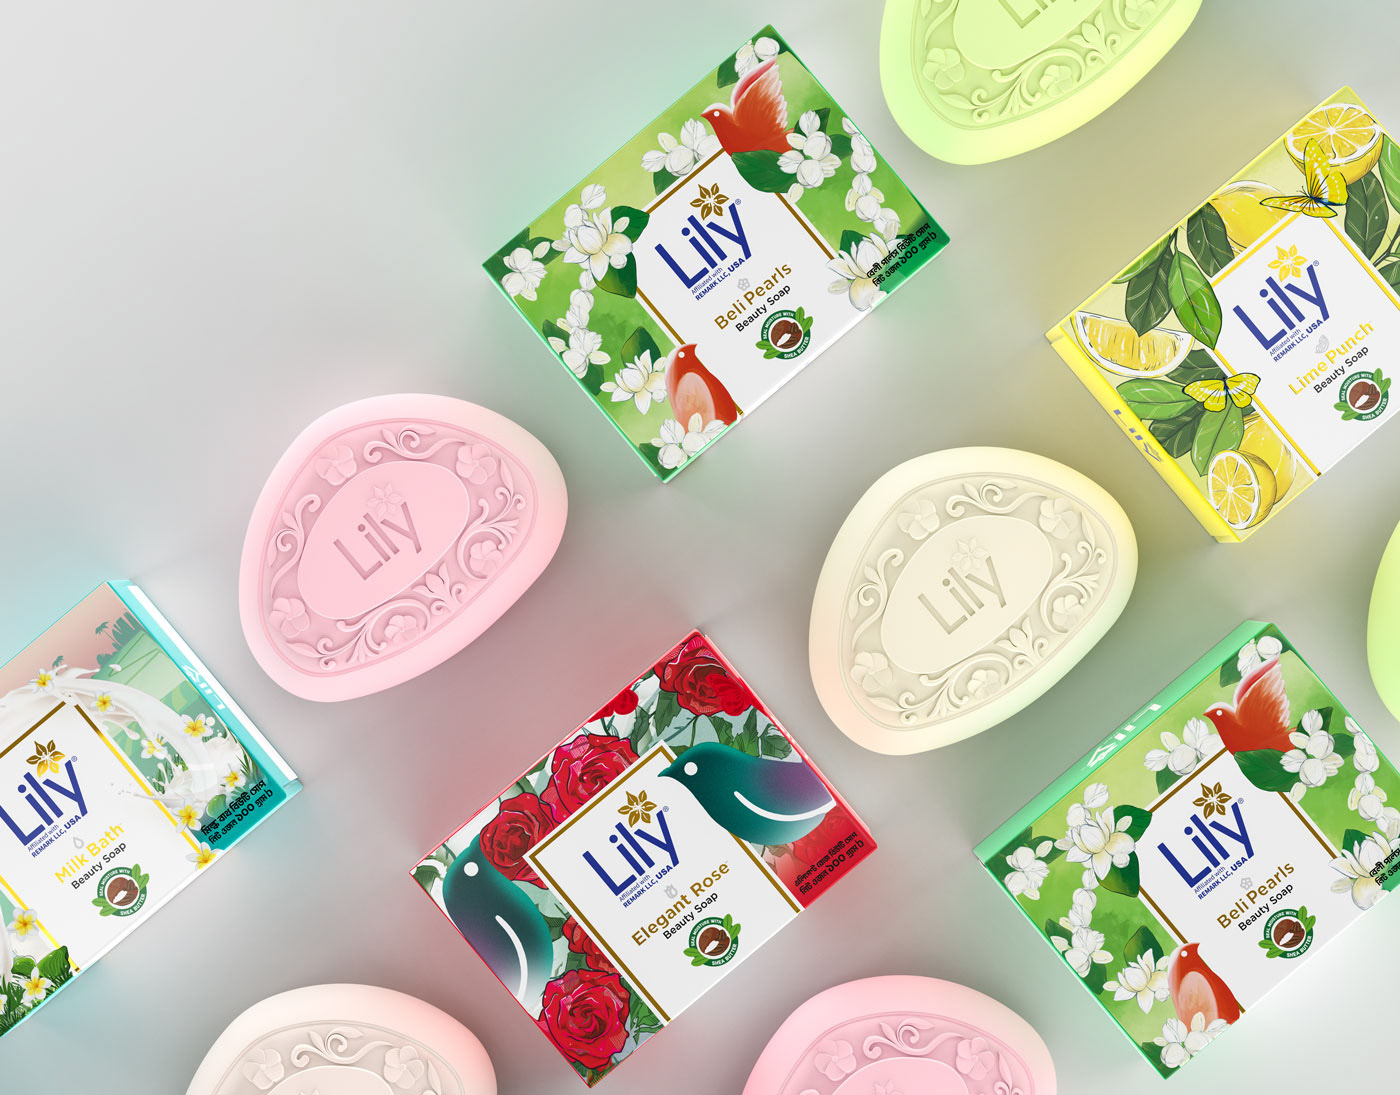 productdesign Packaging 3D 3d modeling Render soap soap packaging soapbox soaps cosmetics